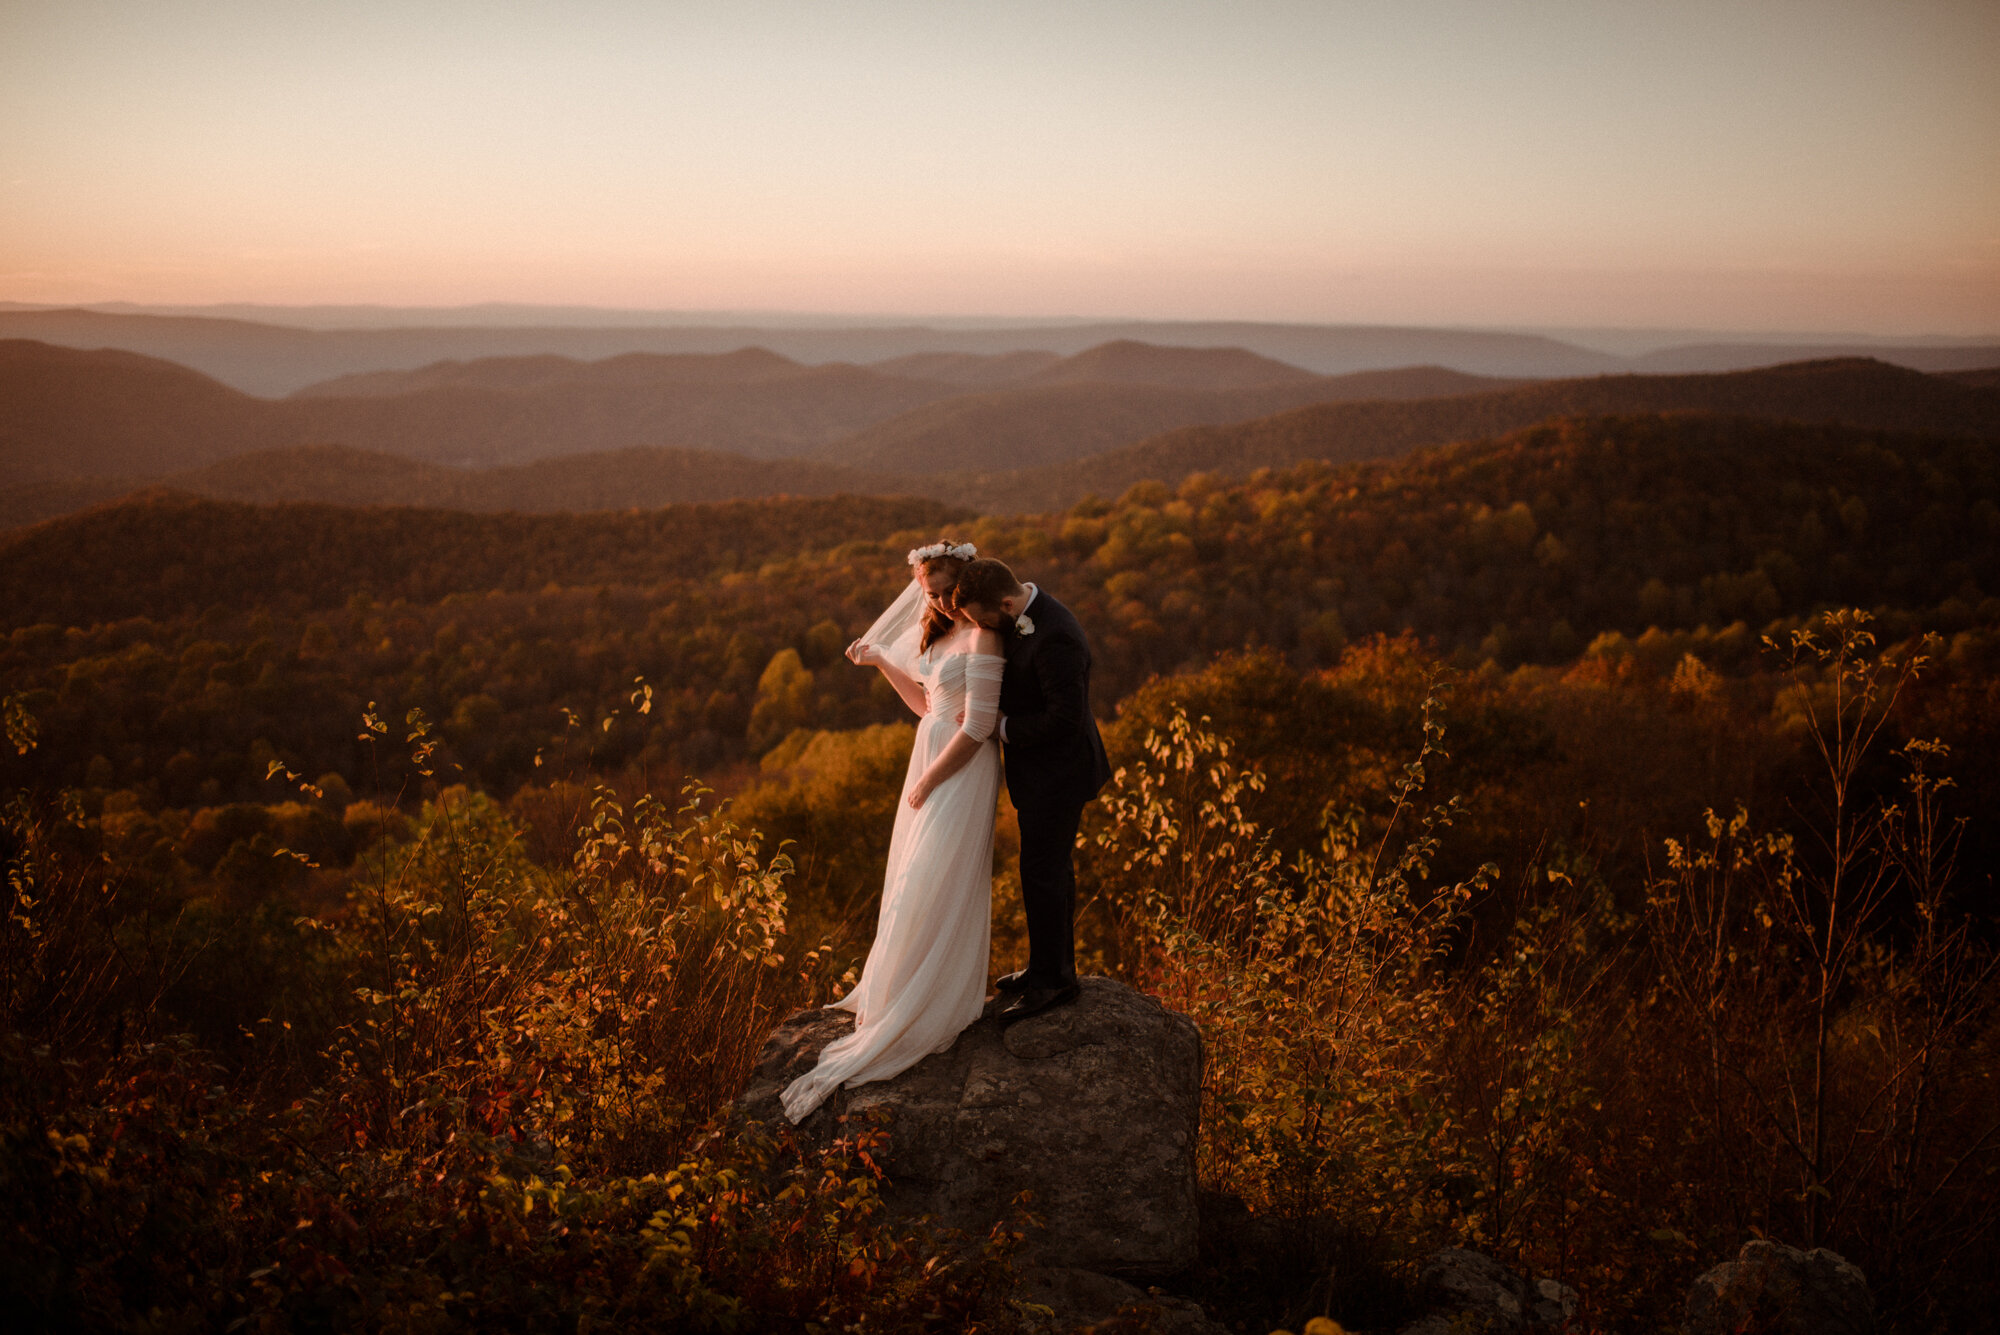 Emily and Ryan - Mountain Top Elopement - Shenandoah National Park - Blue Ridge Mountains Couple Photo Shoot in the Fall - White Sails Creative_68.jpg